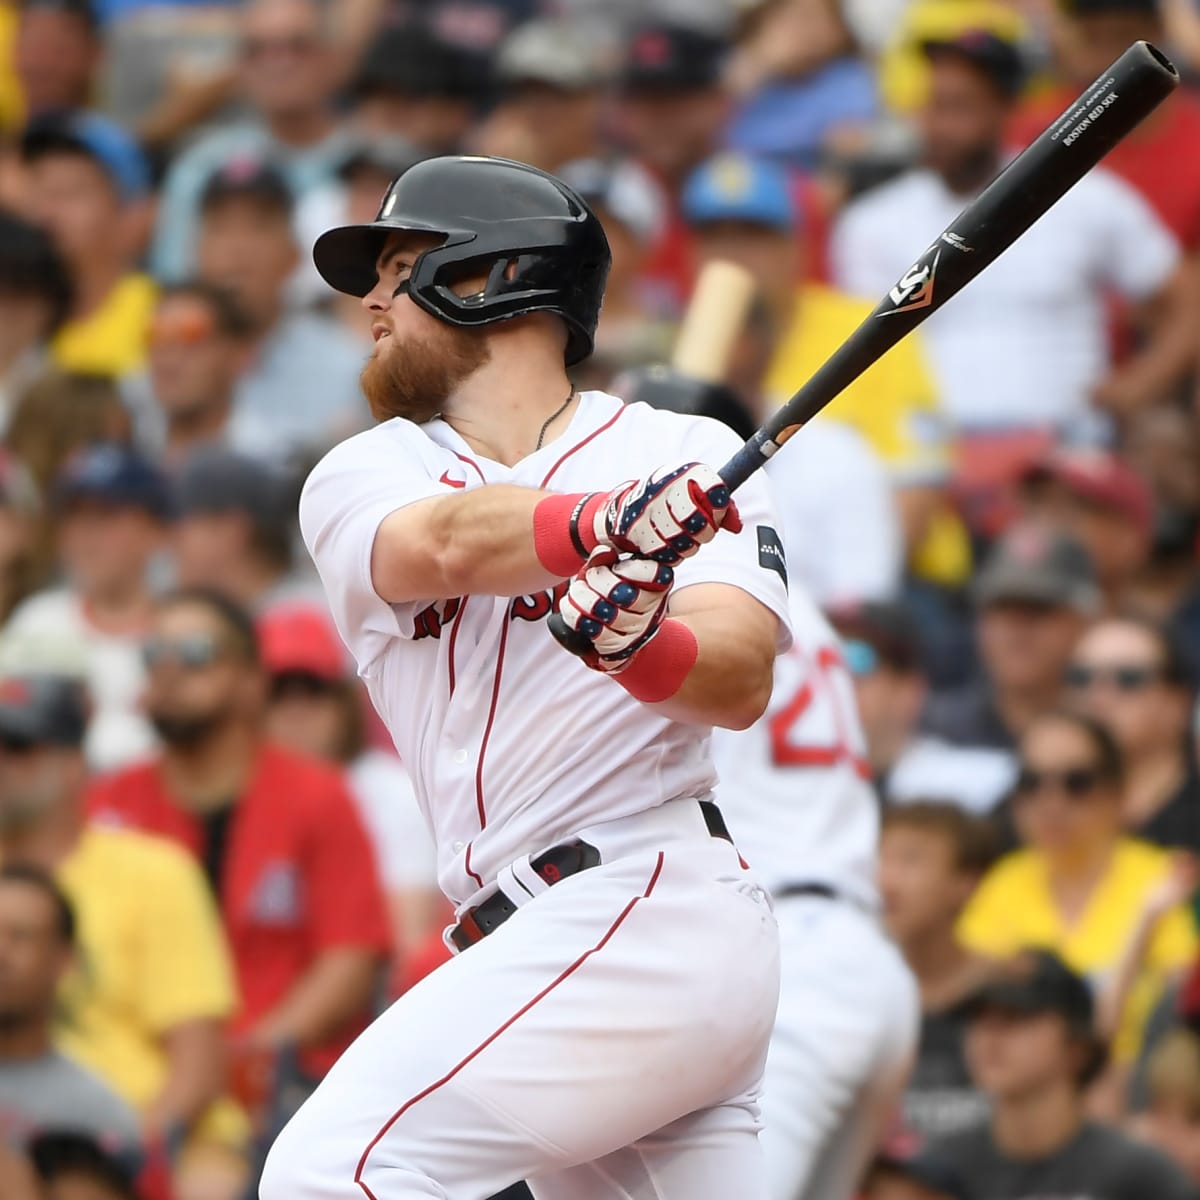 Christian Arroyo has gone from first-round pick to little-used utilityman,  but he's finding a place with the Red Sox - The Boston Globe